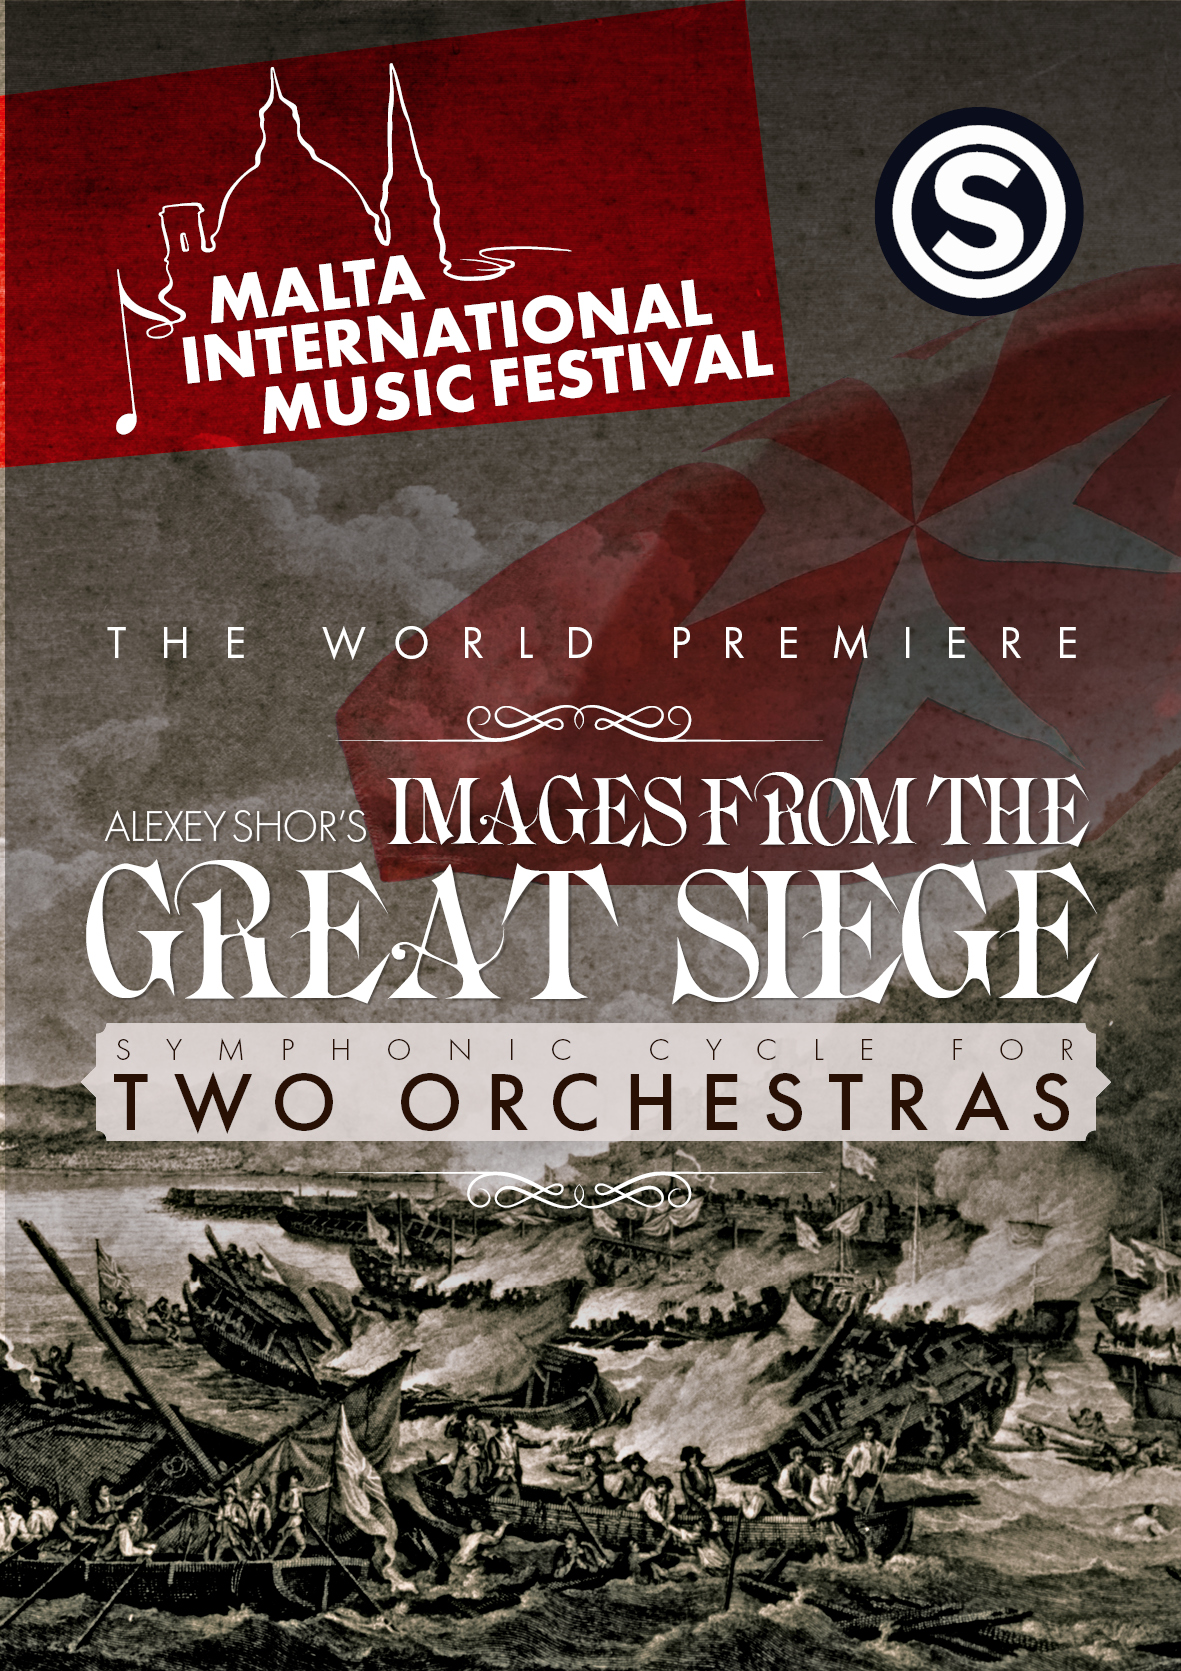 The world premiere of 'Images from the Great Siege' poster